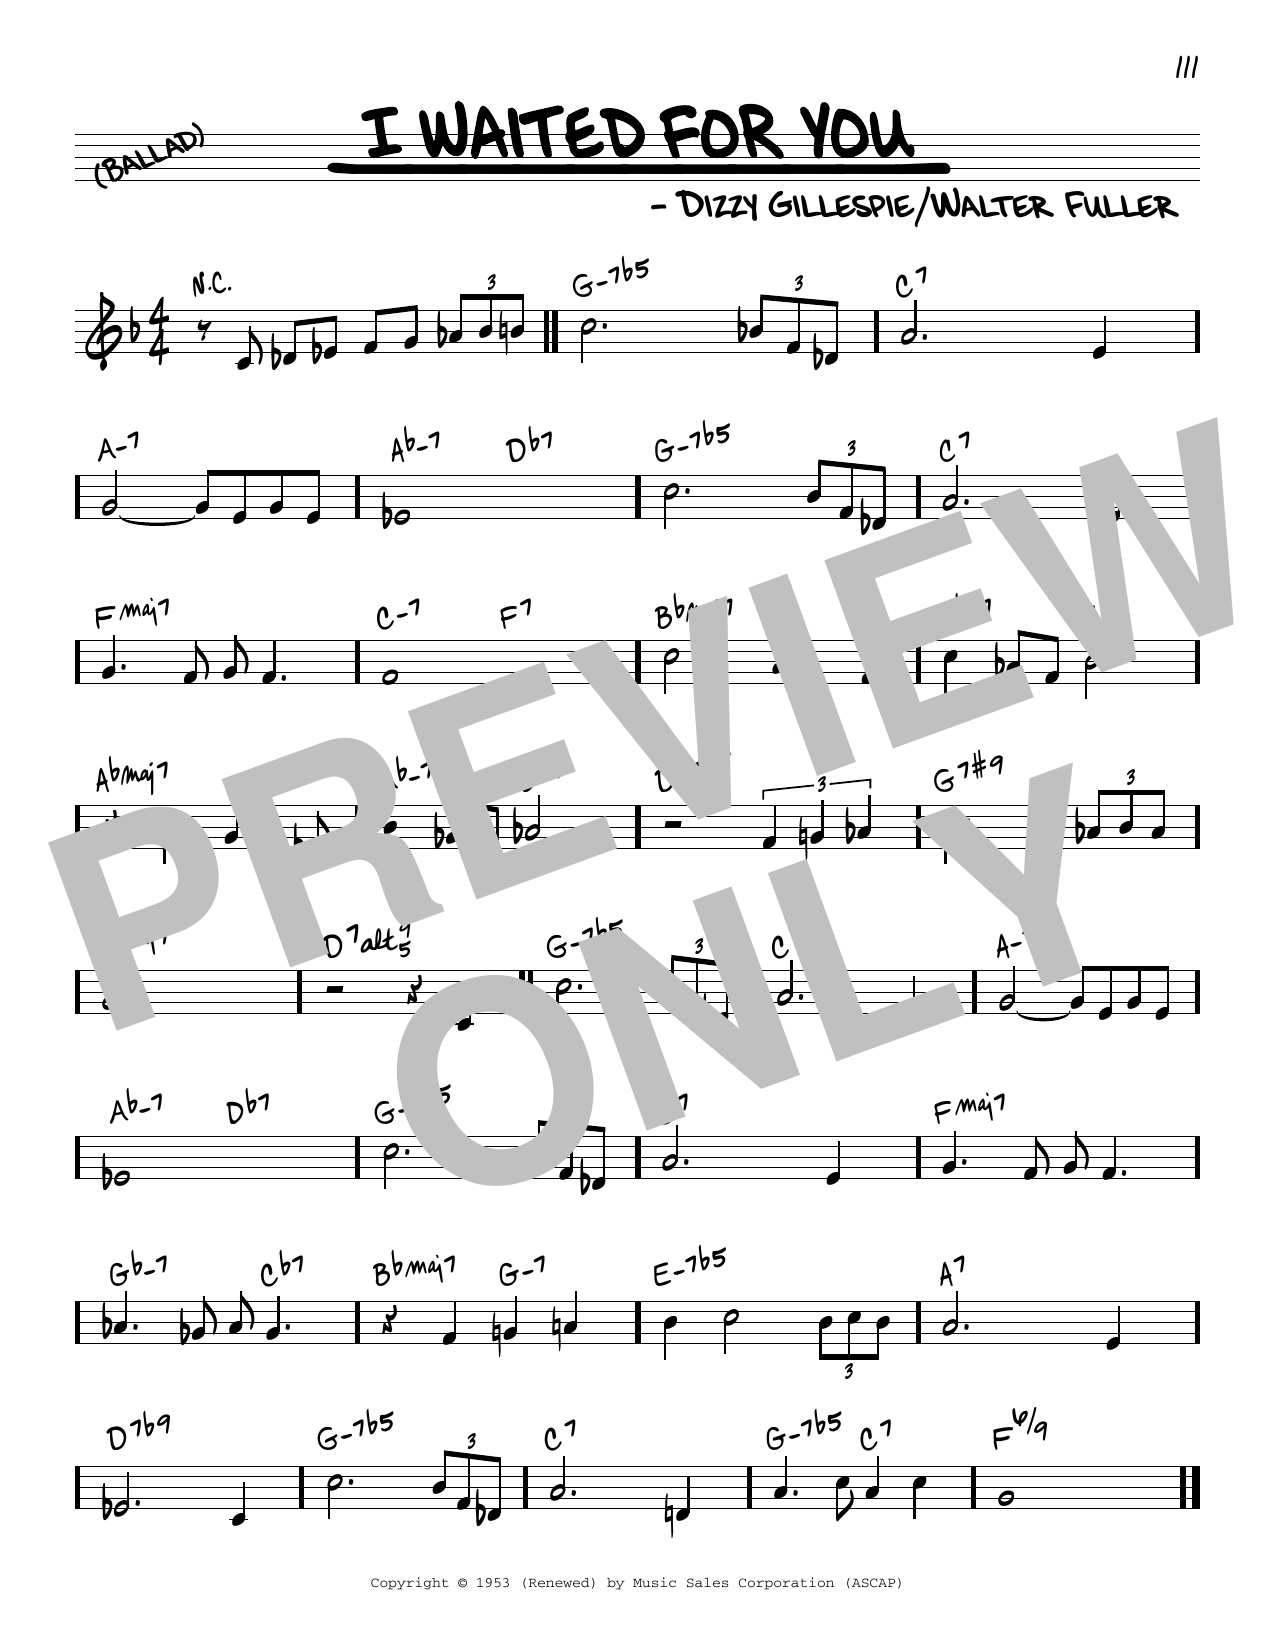 Download Dizzy Gillespie I Waited For You Sheet Music